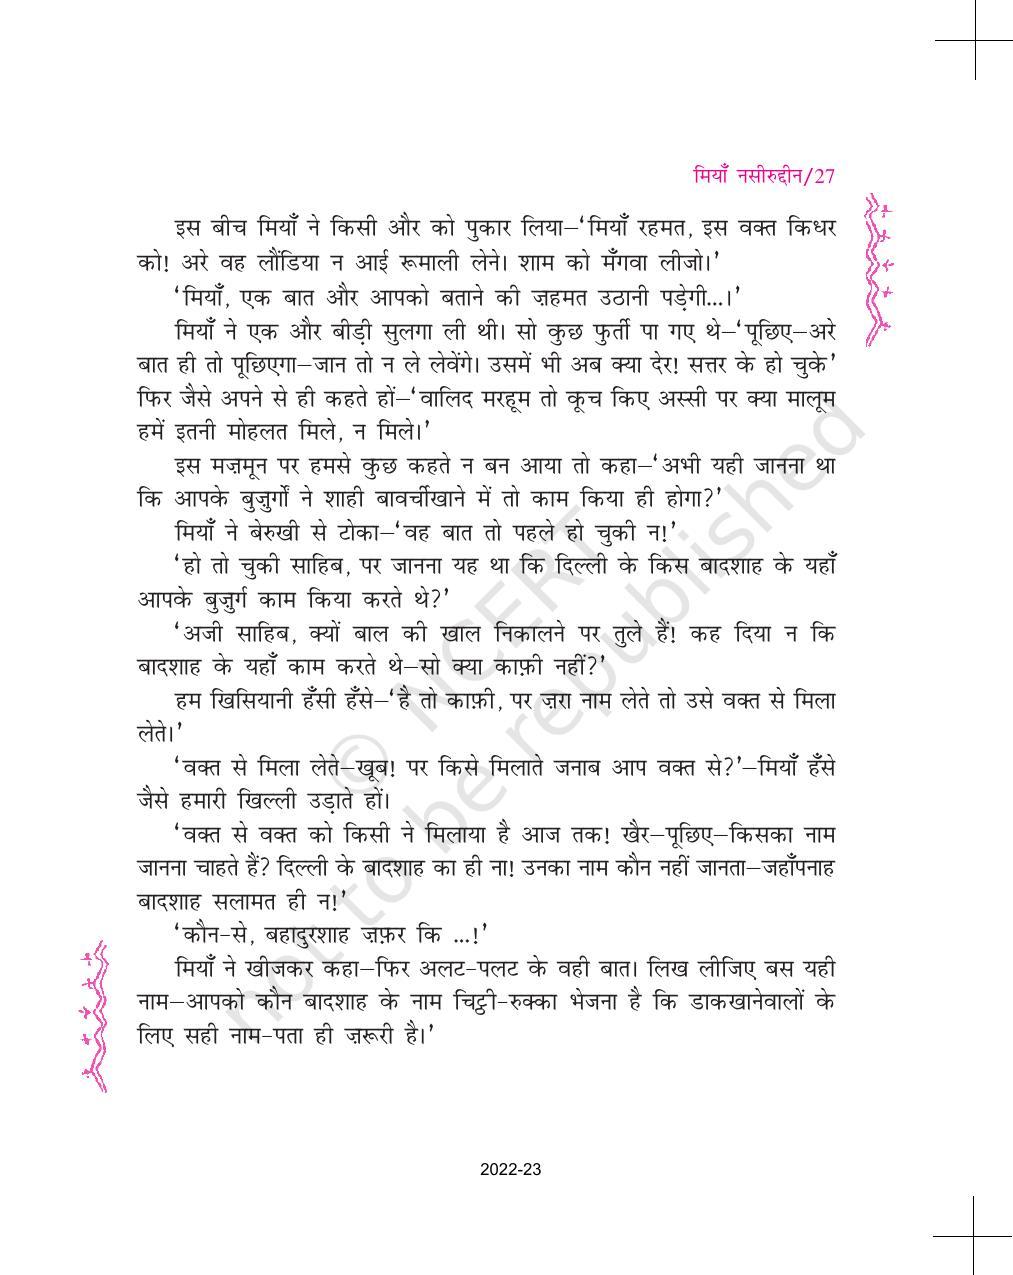 NCERT Book for Class 11 Hindi Aroh Chapter 2 मियाँ नसीरुद्दीन - Page 8